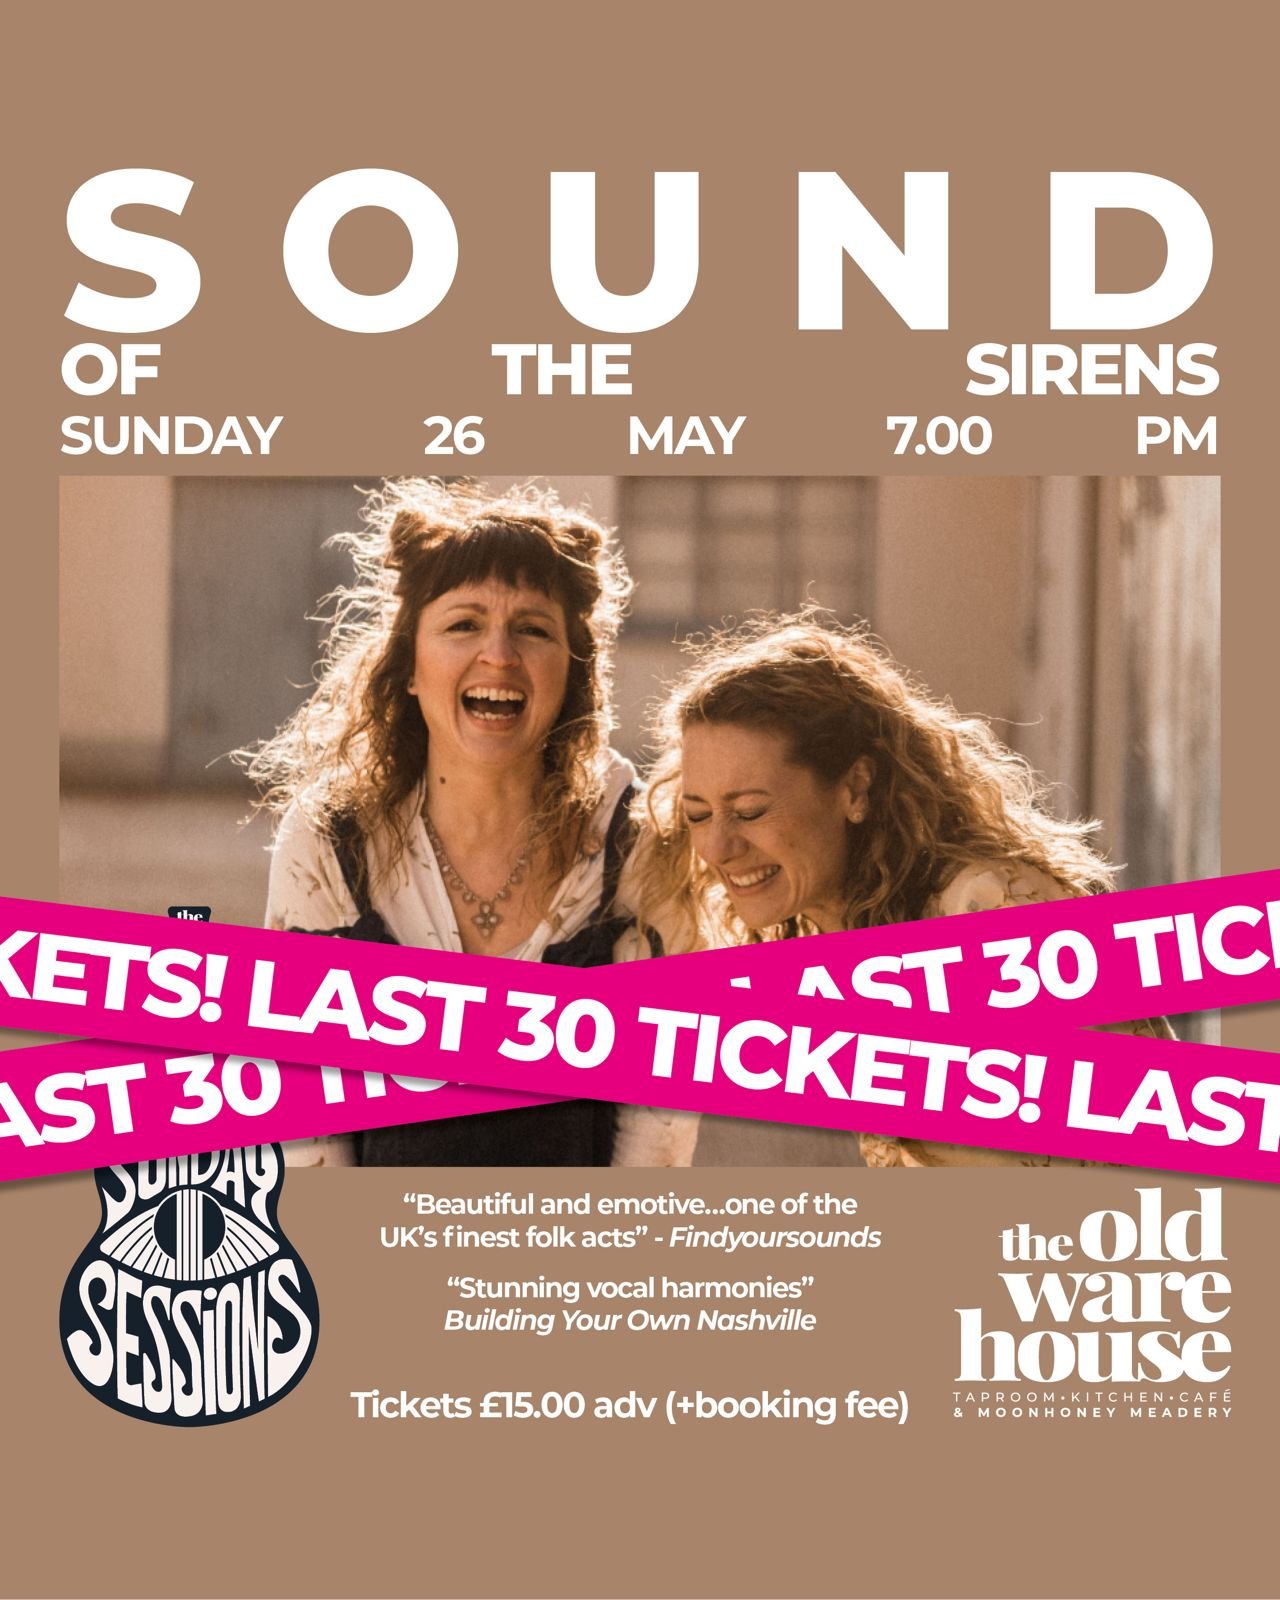 LOW TICKET WARNING...LOW TICKET WARNING...LOW TICKET WARNING

It's hard to believe but we are already down to the last 30 tickets for the launch of our &quot;Sunday Sessions&quot; on May 26th featuring the incredible @sound_of_the_sirens! 

Full deta